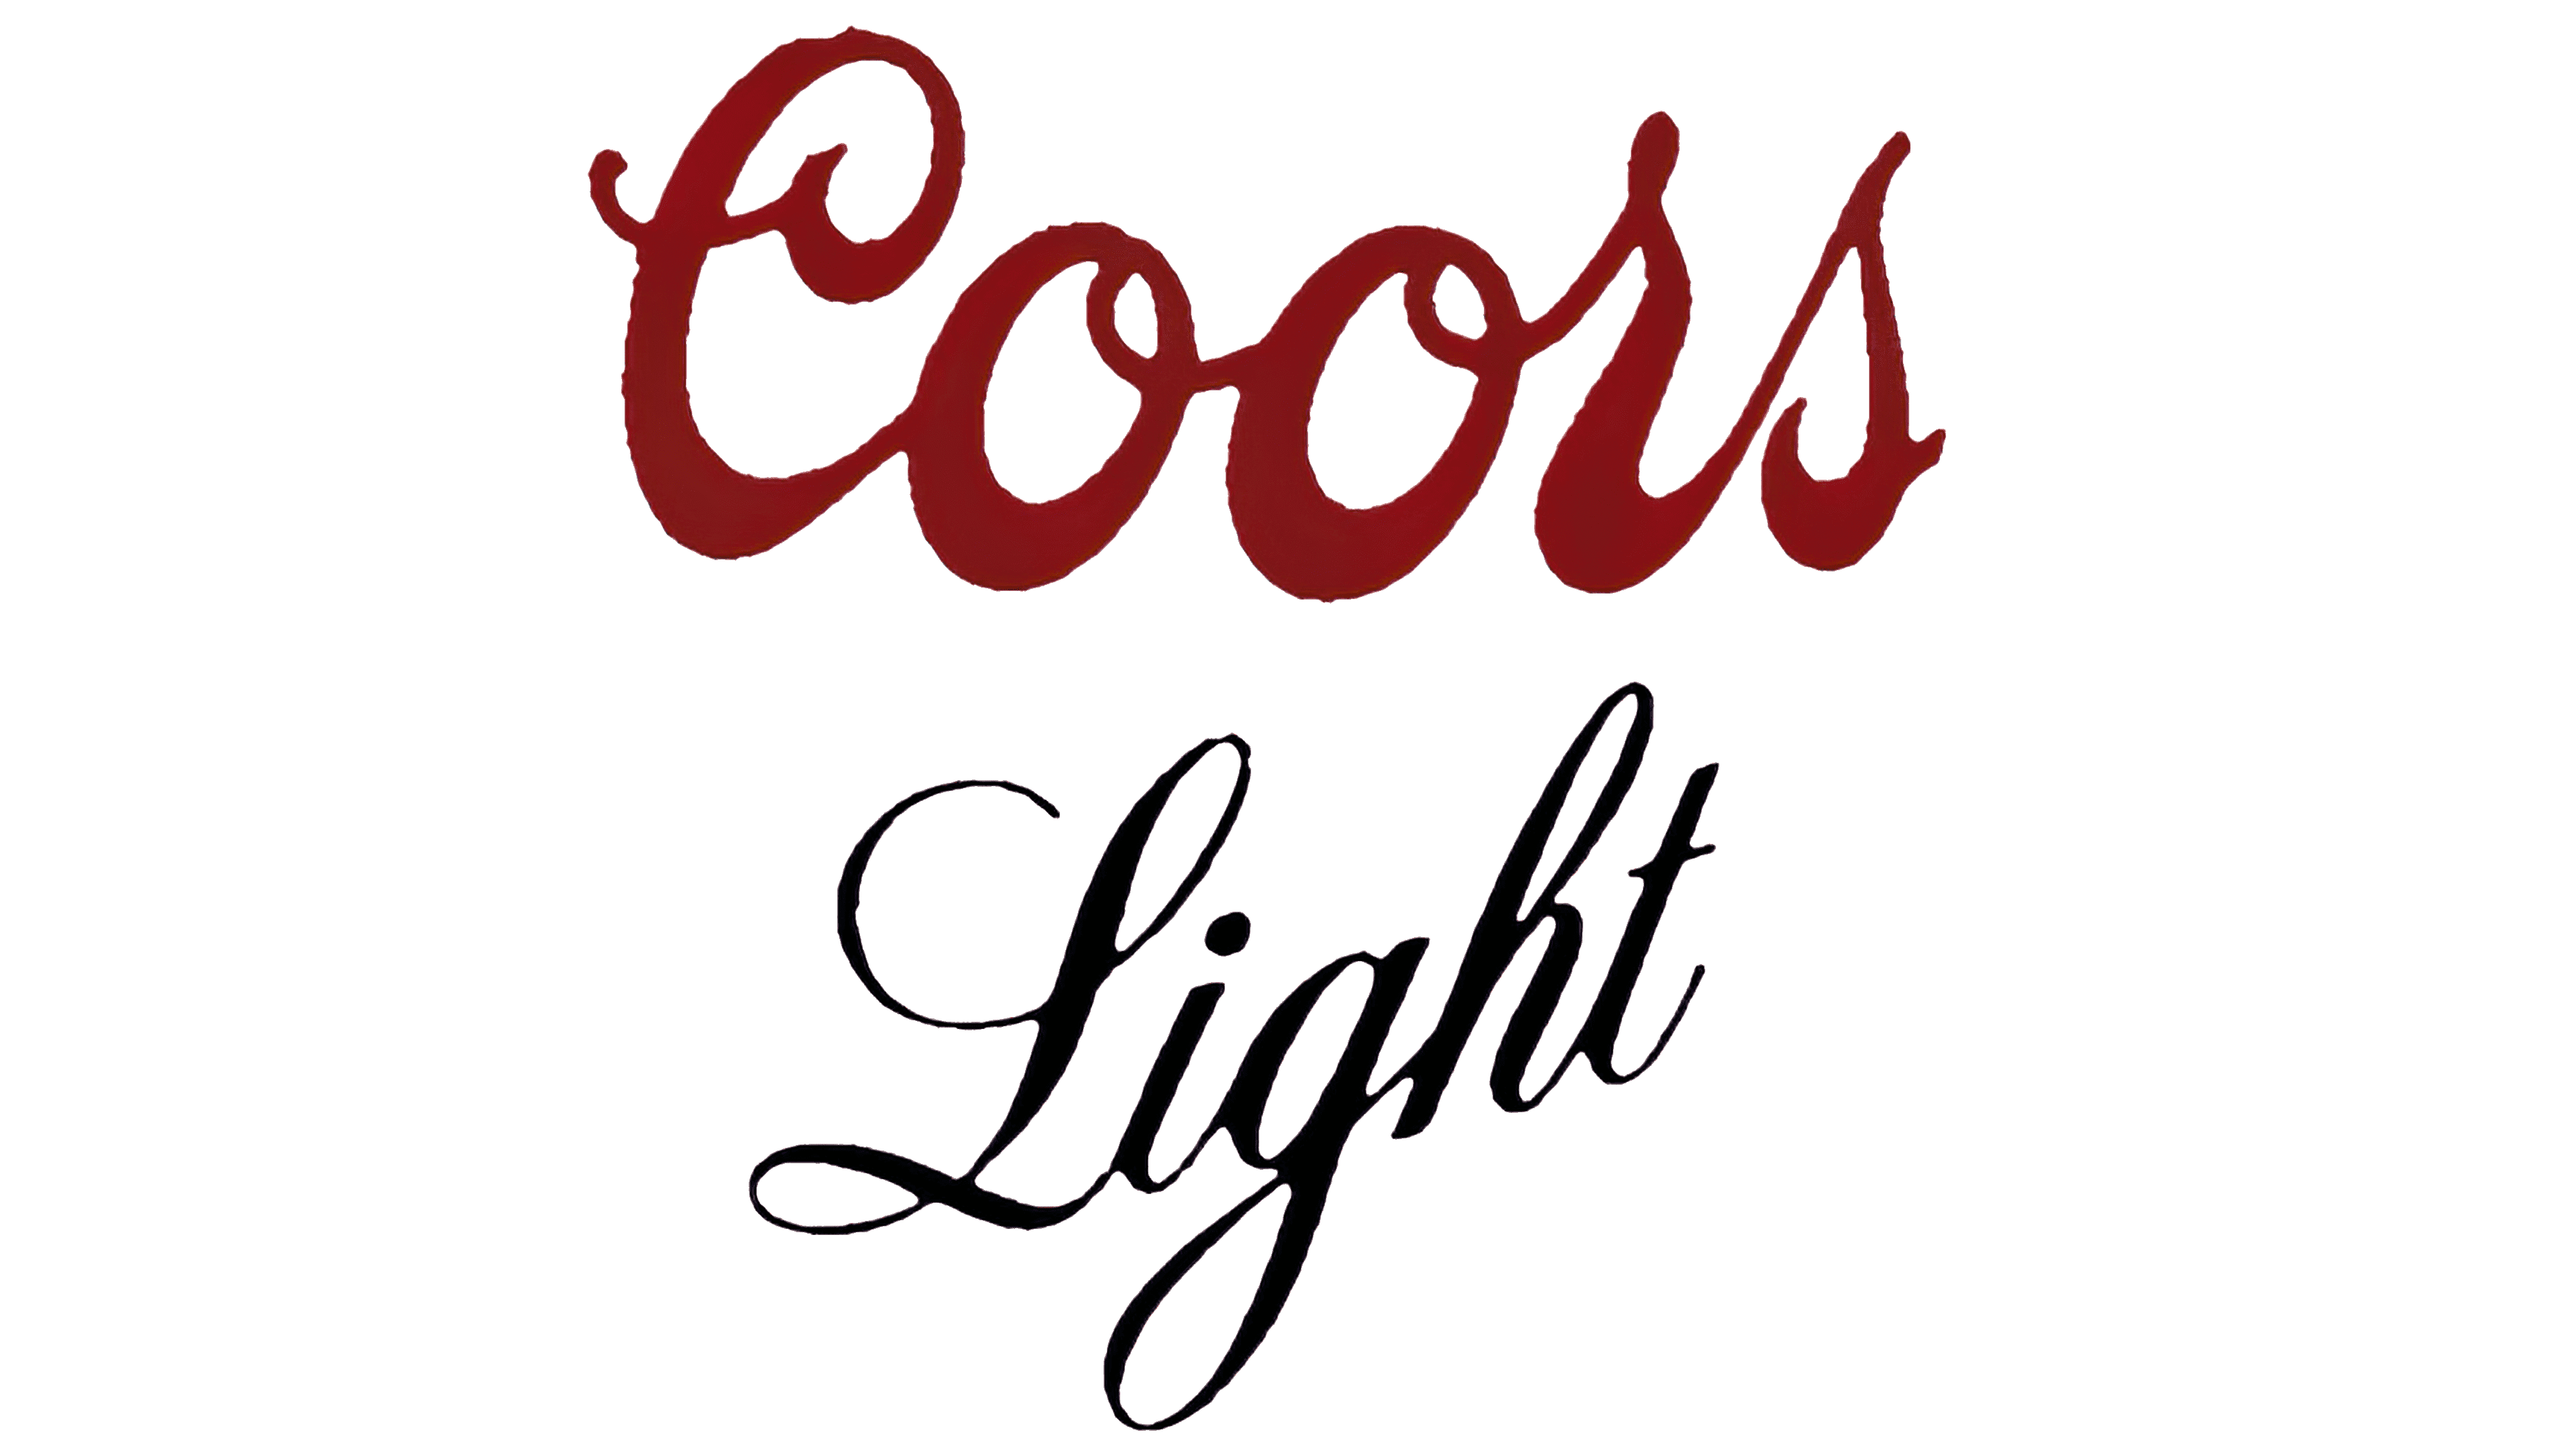 Coors Light Logo PNG Images HD